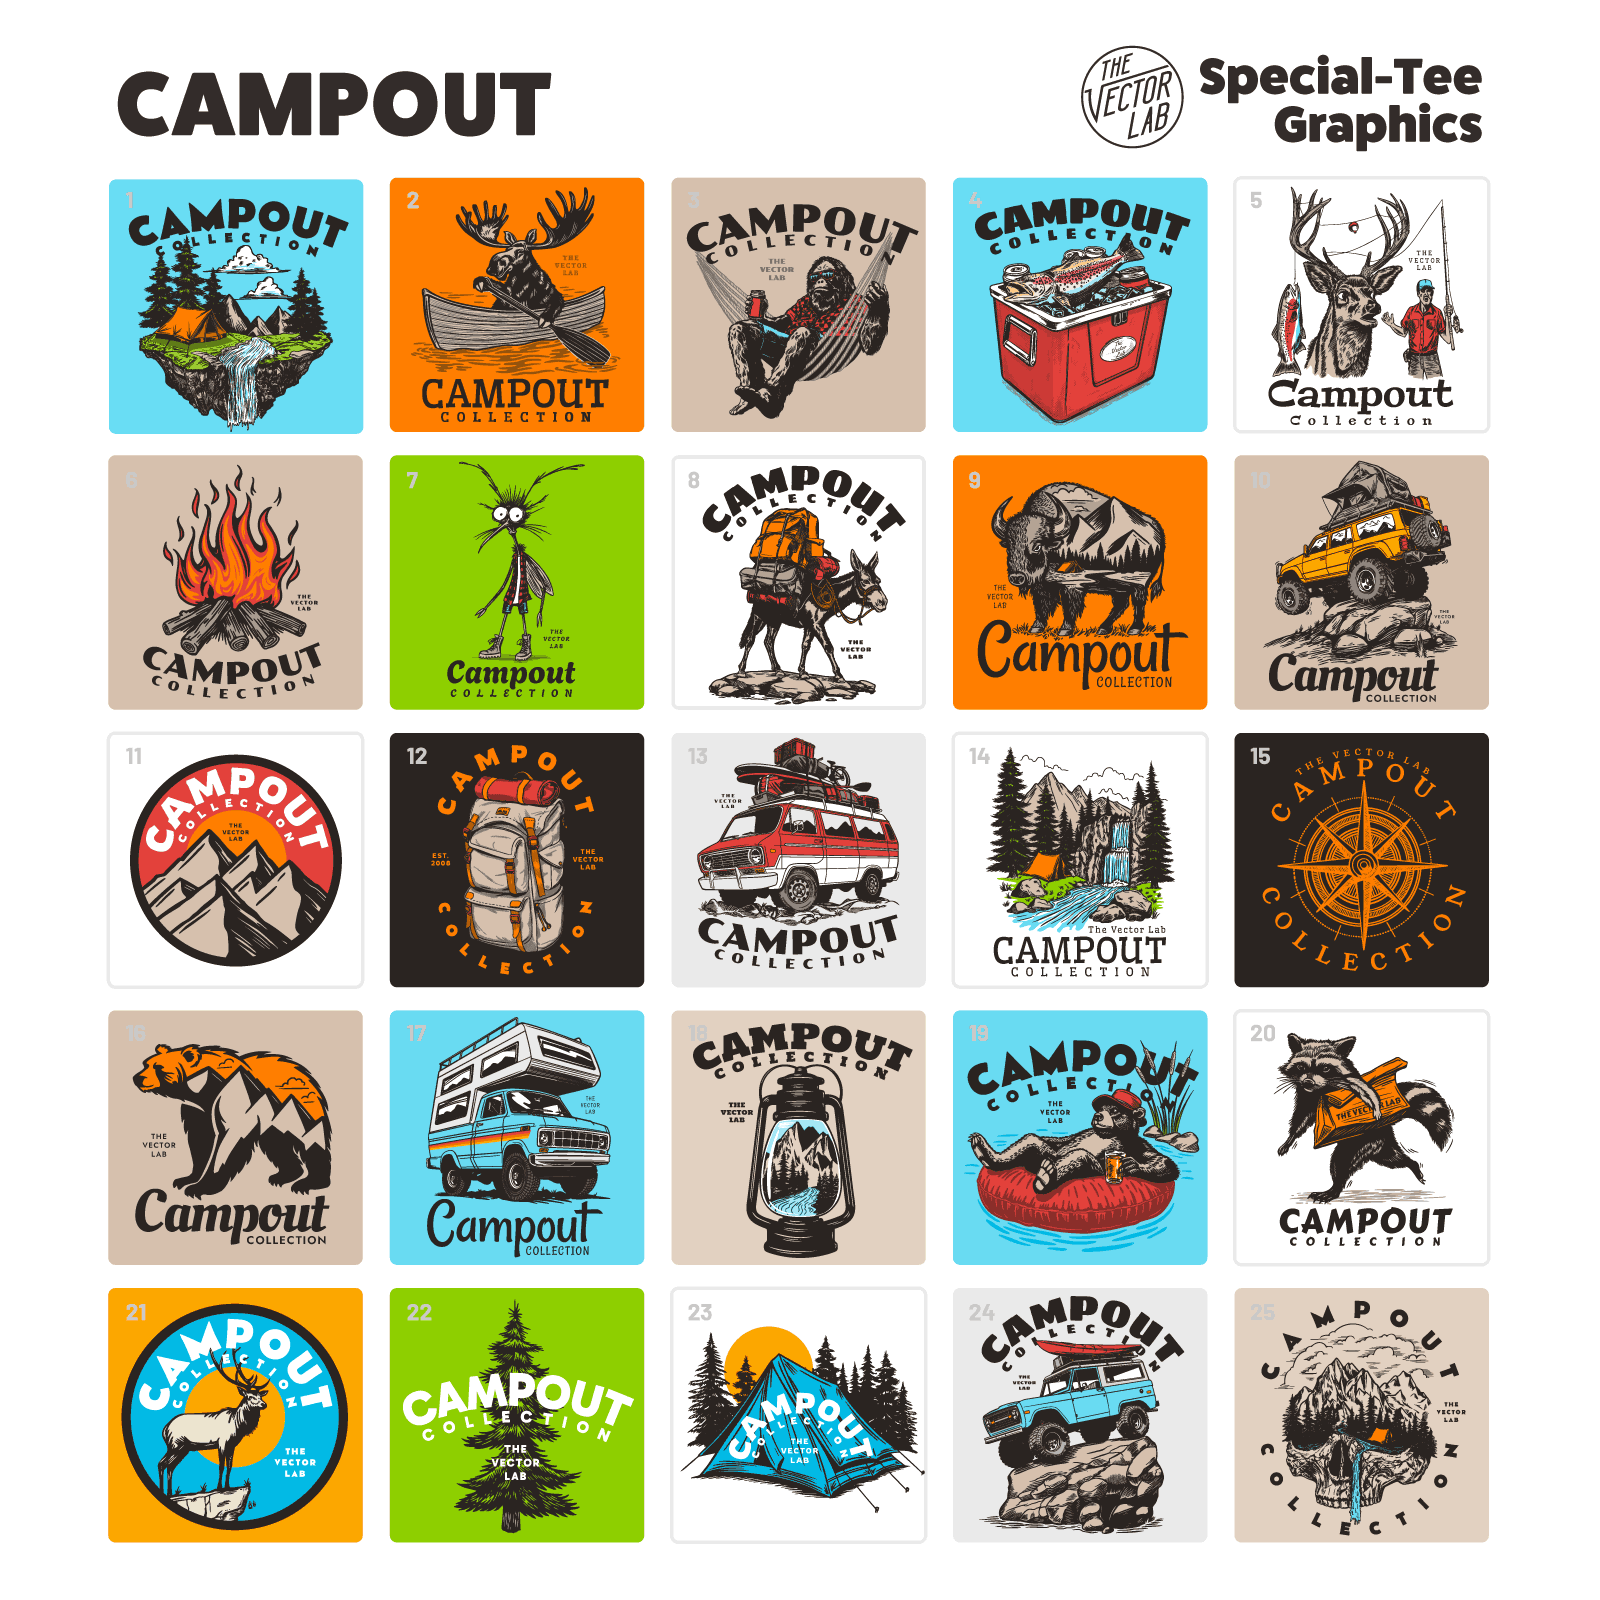 Campout Outdoors • Nature • Camping graphic templates for t-shirts, hats, stickers